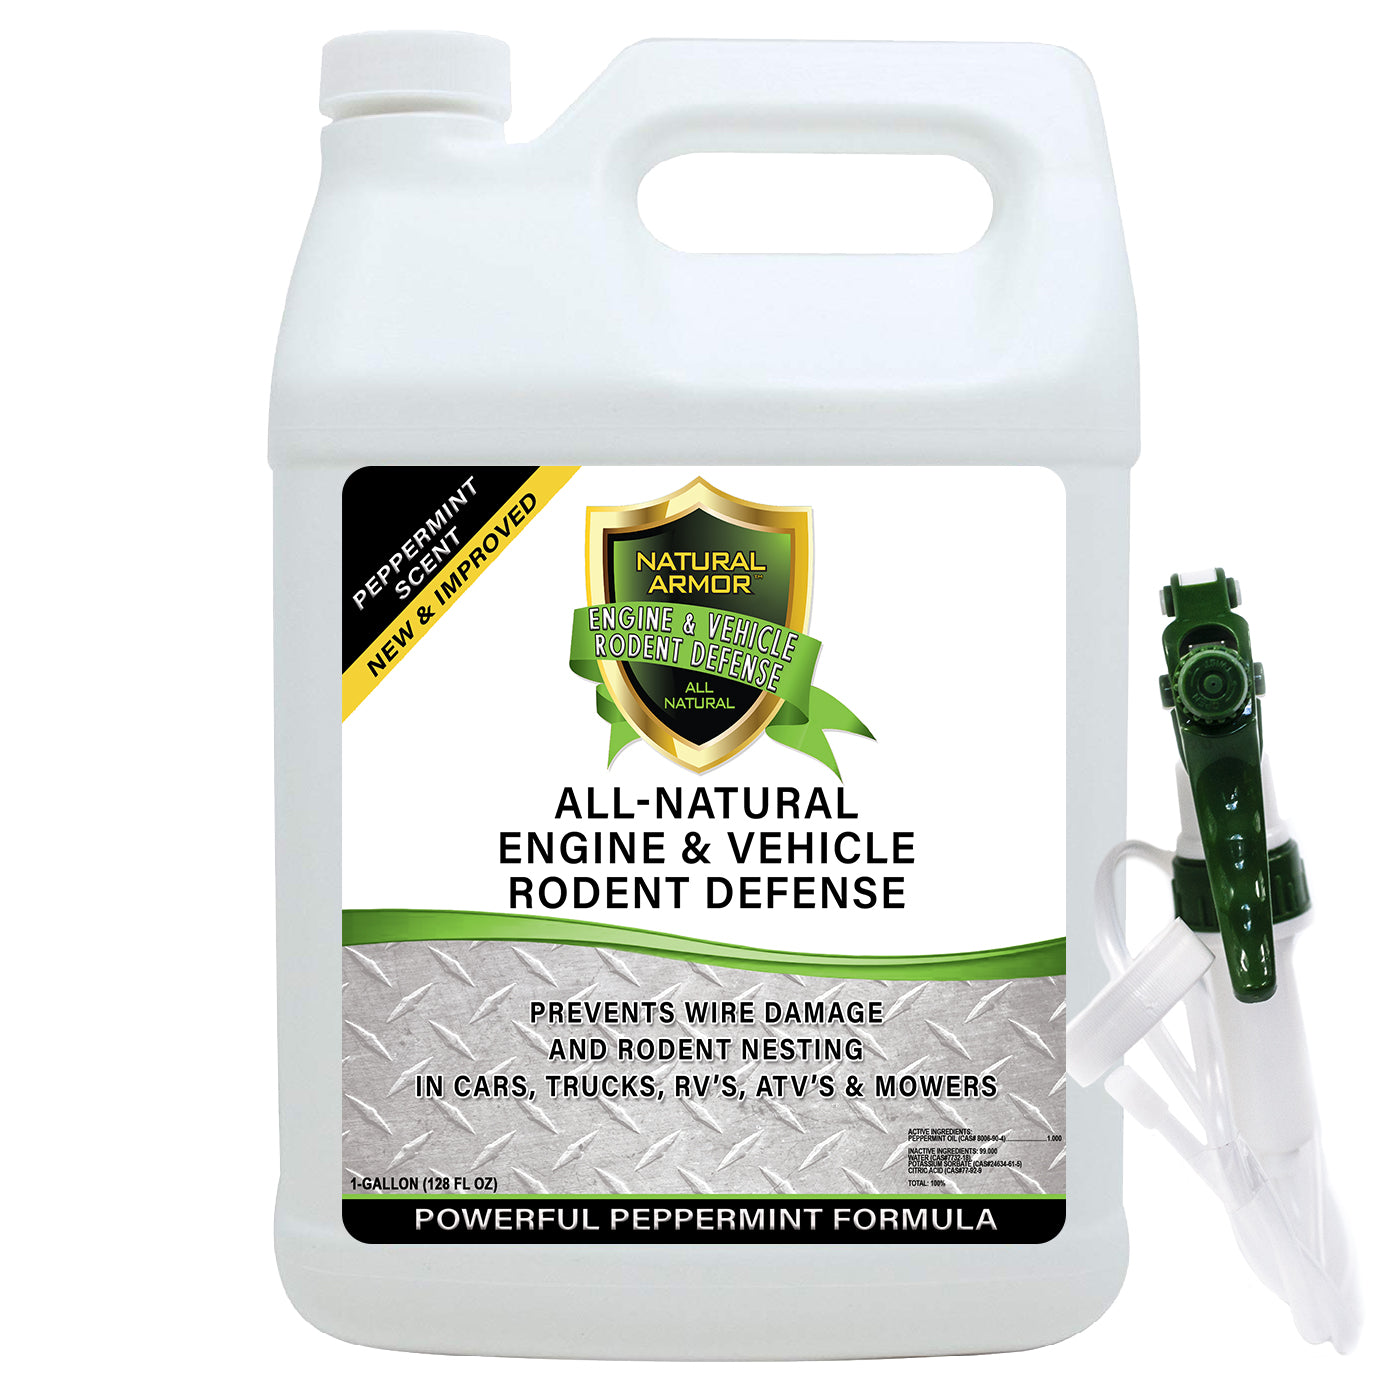 All-Natural Vehicle & Engine Protection - 1 GALLON Spray